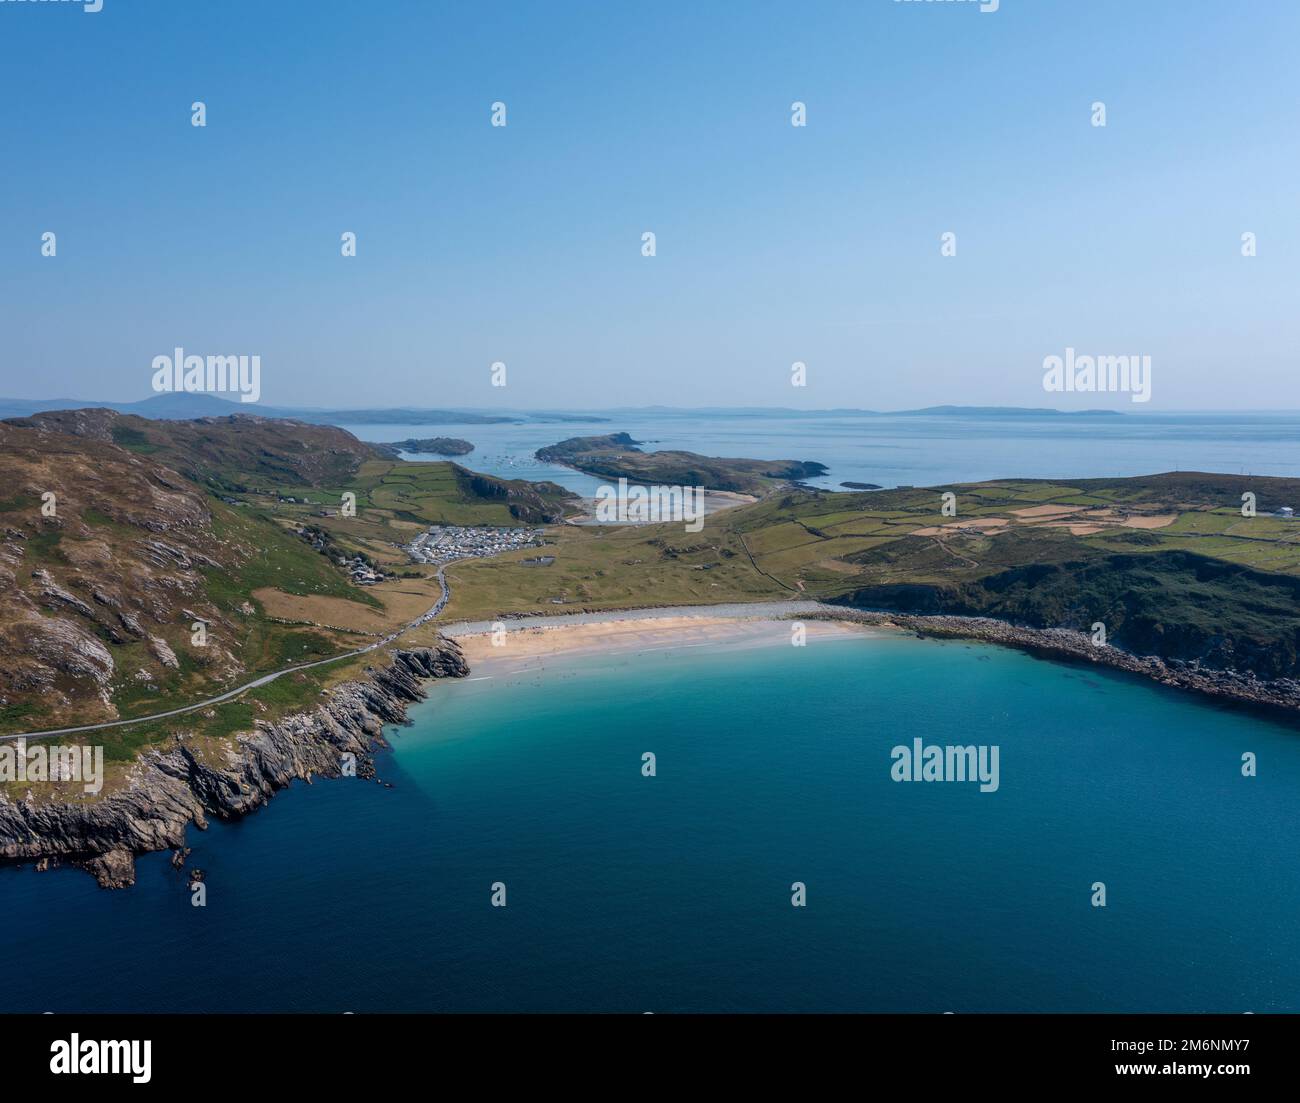 Aerial view of Lackenakea Bay Beach in Barley Cove on the Mizen Peninsula of West Cork in Ireland Stock Photo